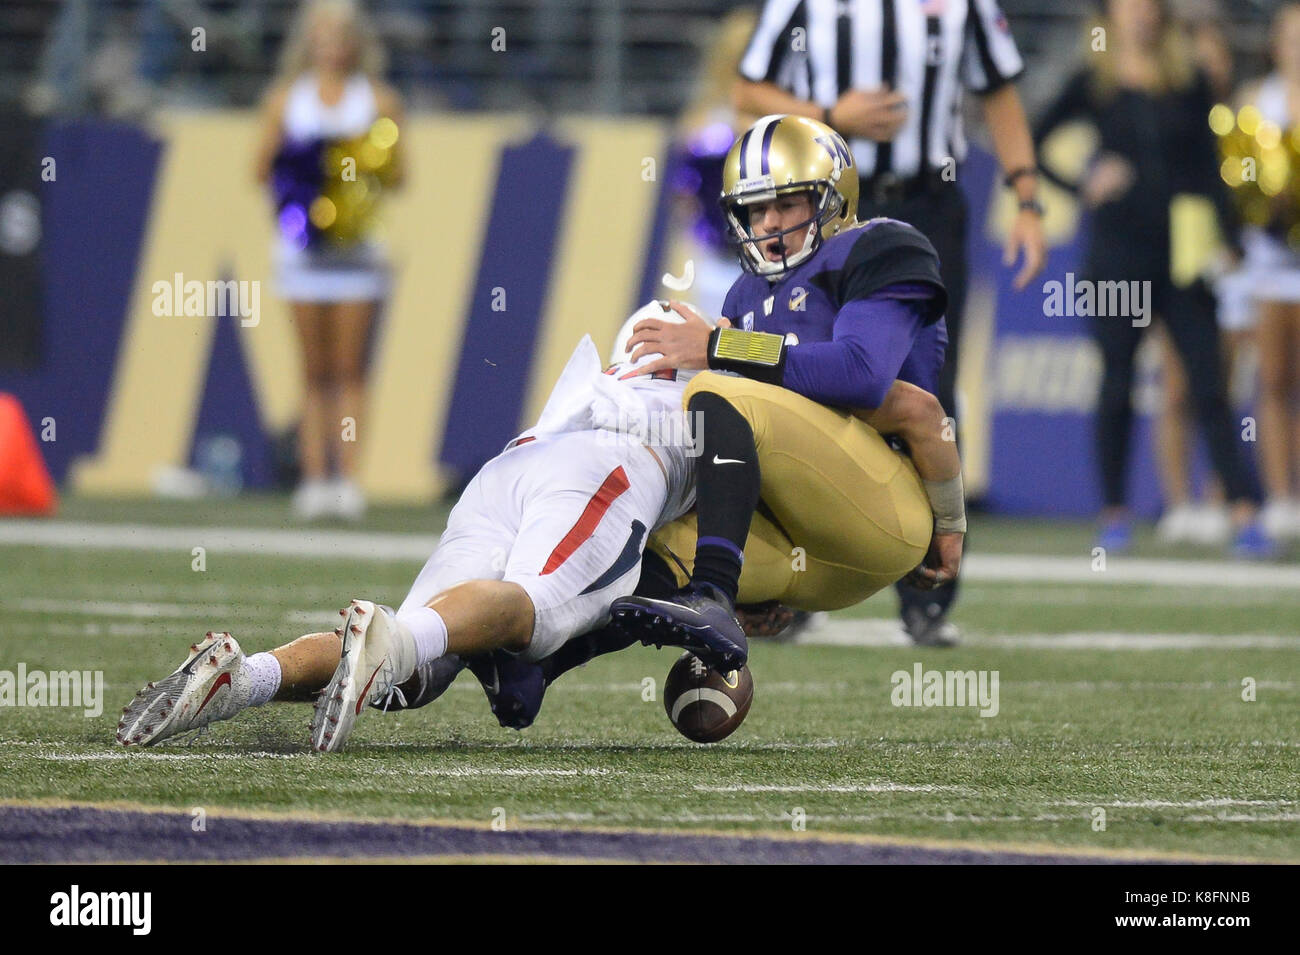 Seattle, WA, USA. 16th Sep, 2017. Fresno defender George Helmuth (34) forces a fumble on UW quarterback KJ Carta-Samuels (11) during a NCAA football game between the Fresno State Bulldogs and the Washington Huskies. The game was played at Husky Stadium in Seattle, WA. Jeff Halstead/CSM/Alamy Live News Stock Photo